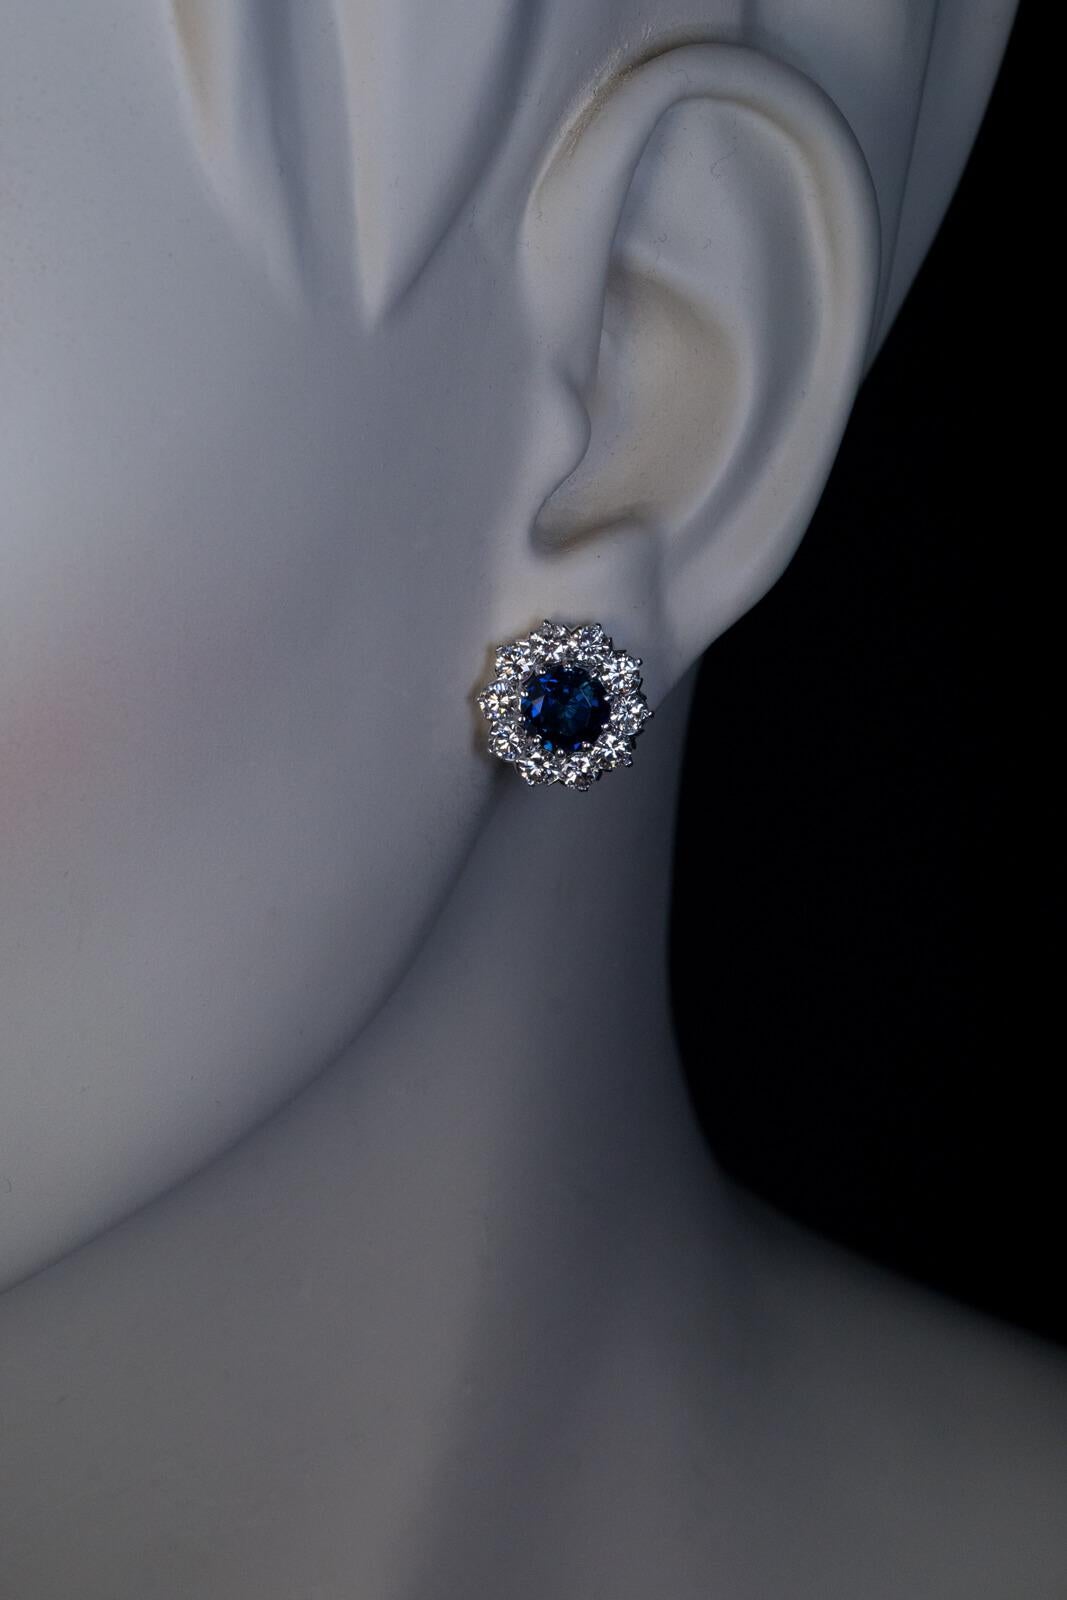 The earrings are crafted in white 14K gold. They are centered with round dark blue sapphires (approximately 1.67 cts and 1.65 cts) surrounded by high quality brilliant cut diamonds (bright white and clean, E-F color, VVS2-VS1 clarity).  Estimated